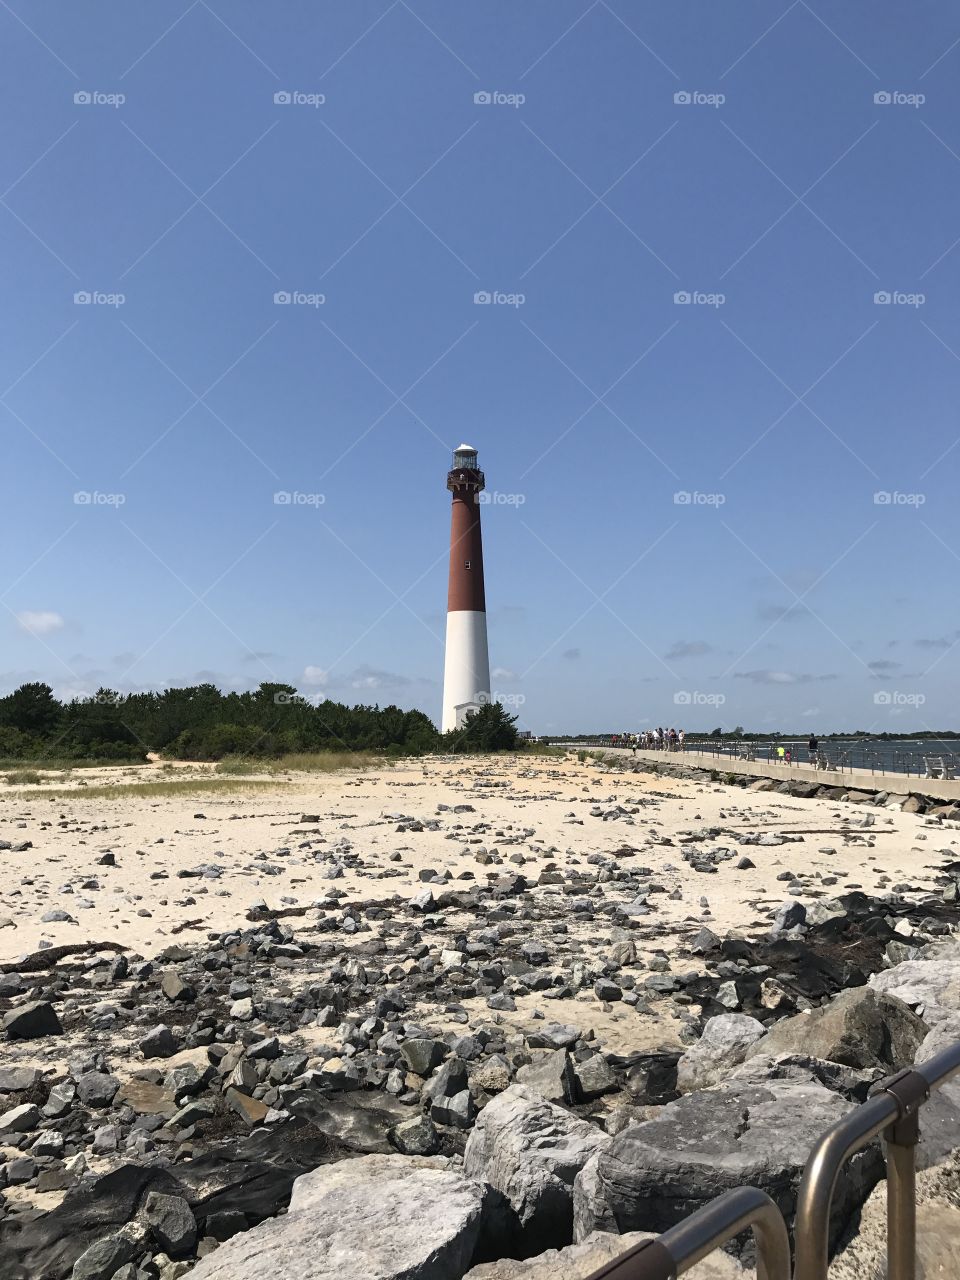 No Person, Outdoors, Sky, Lighthouse, Travel